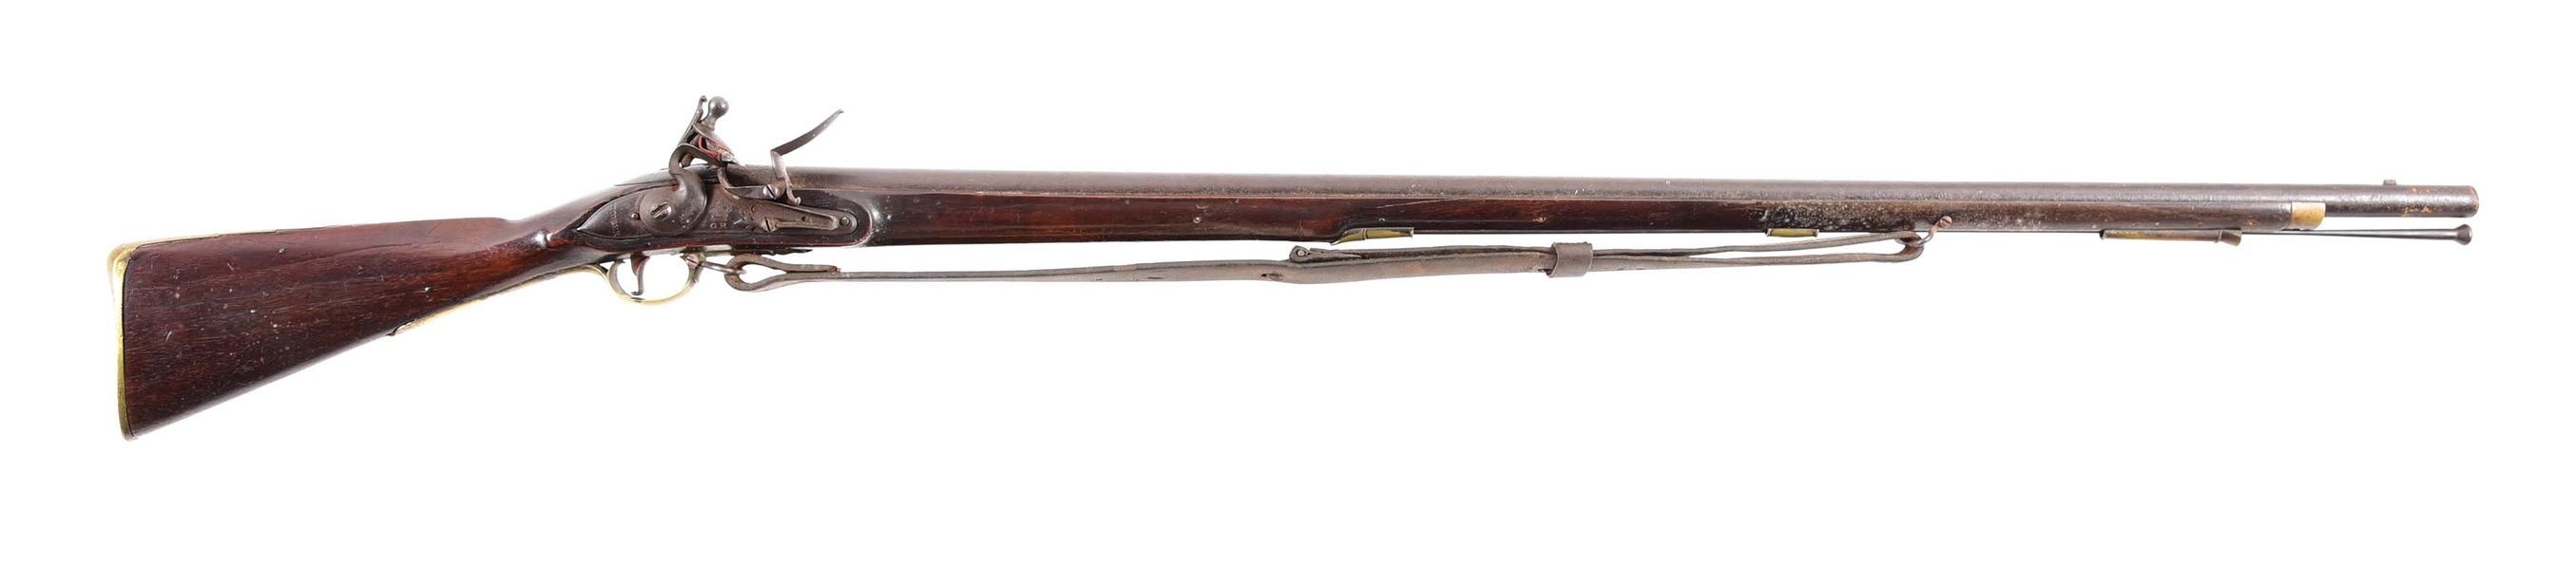 (A) AMERICAN RE-STOCKED PATTERN 1756 FIRST MODEL BROWN BESS MUSKET.